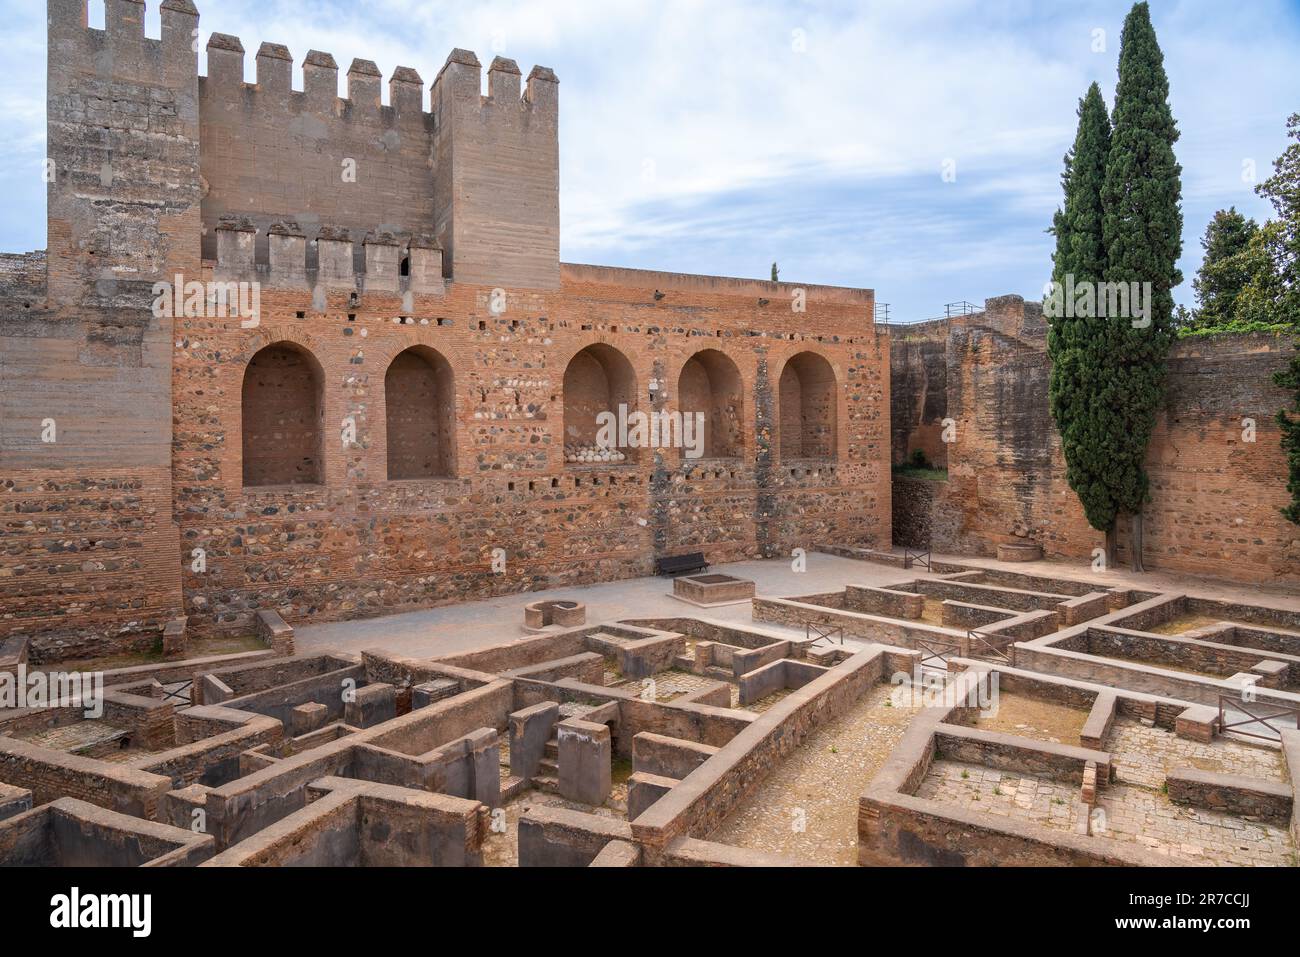 Buildings foundations at Plaza de Armas (Arms Square) inside Alcazaba area of Alhambra fortress - Granada, Andalusia, Spain Stock Photo